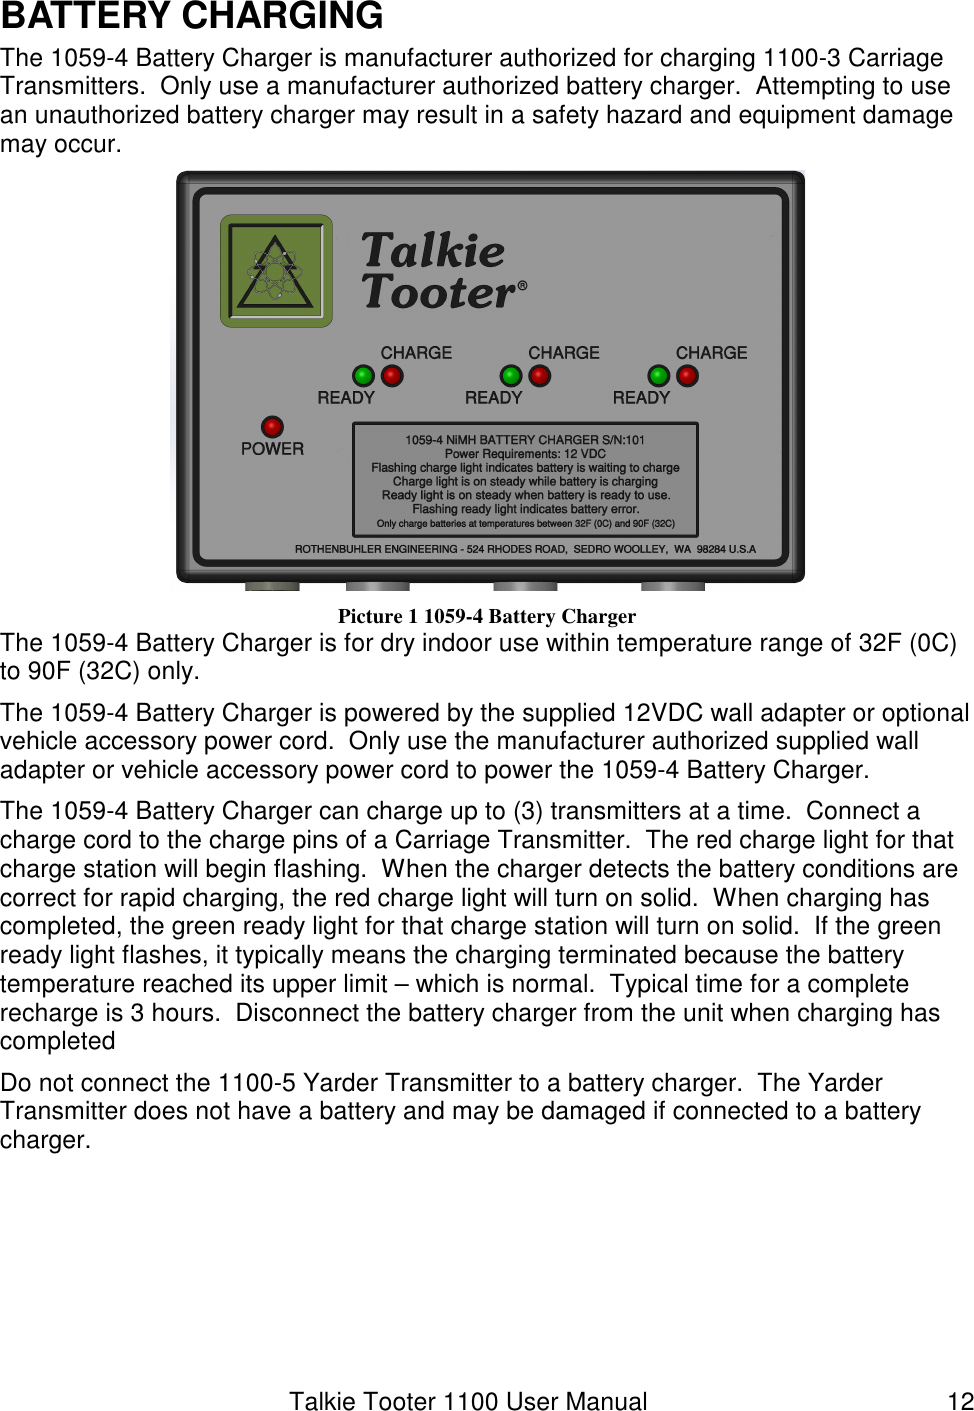 Talkie Tooter 1100 User Manual  12 BATTERY CHARGING The 1059-4 Battery Charger is manufacturer authorized for charging 1100-3 Carriage Transmitters.  Only use a manufacturer authorized battery charger.  Attempting to use an unauthorized battery charger may result in a safety hazard and equipment damage may occur.    Picture 1 1059-4 Battery Charger The 1059-4 Battery Charger is for dry indoor use within temperature range of 32F (0C) to 90F (32C) only. The 1059-4 Battery Charger is powered by the supplied 12VDC wall adapter or optional vehicle accessory power cord.  Only use the manufacturer authorized supplied wall adapter or vehicle accessory power cord to power the 1059-4 Battery Charger. The 1059-4 Battery Charger can charge up to (3) transmitters at a time.  Connect a charge cord to the charge pins of a Carriage Transmitter.  The red charge light for that charge station will begin flashing.  When the charger detects the battery conditions are correct for rapid charging, the red charge light will turn on solid.  When charging has completed, the green ready light for that charge station will turn on solid.  If the green ready light flashes, it typically means the charging terminated because the battery temperature reached its upper limit – which is normal.  Typical time for a complete recharge is 3 hours.  Disconnect the battery charger from the unit when charging has completed Do not connect the 1100-5 Yarder Transmitter to a battery charger.  The Yarder Transmitter does not have a battery and may be damaged if connected to a battery charger.     